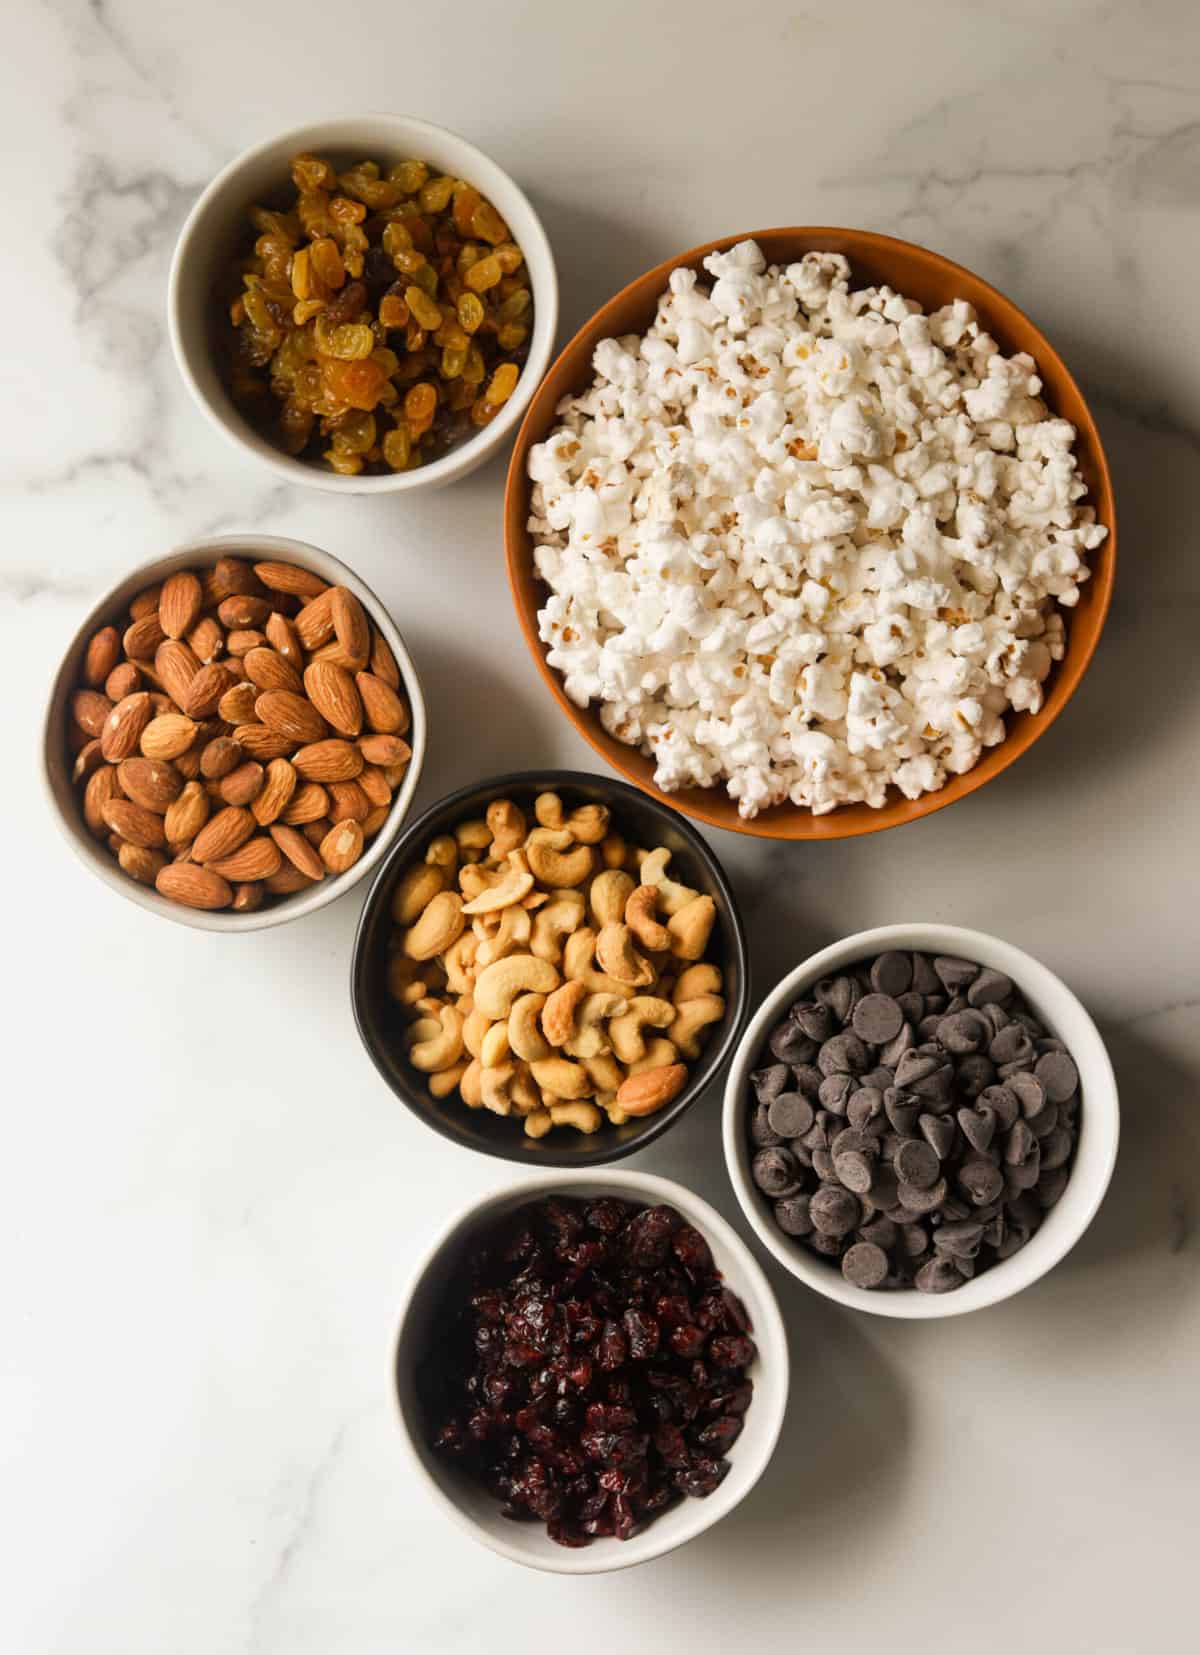 An overhead shot of small bowls of traill mix ingredients.